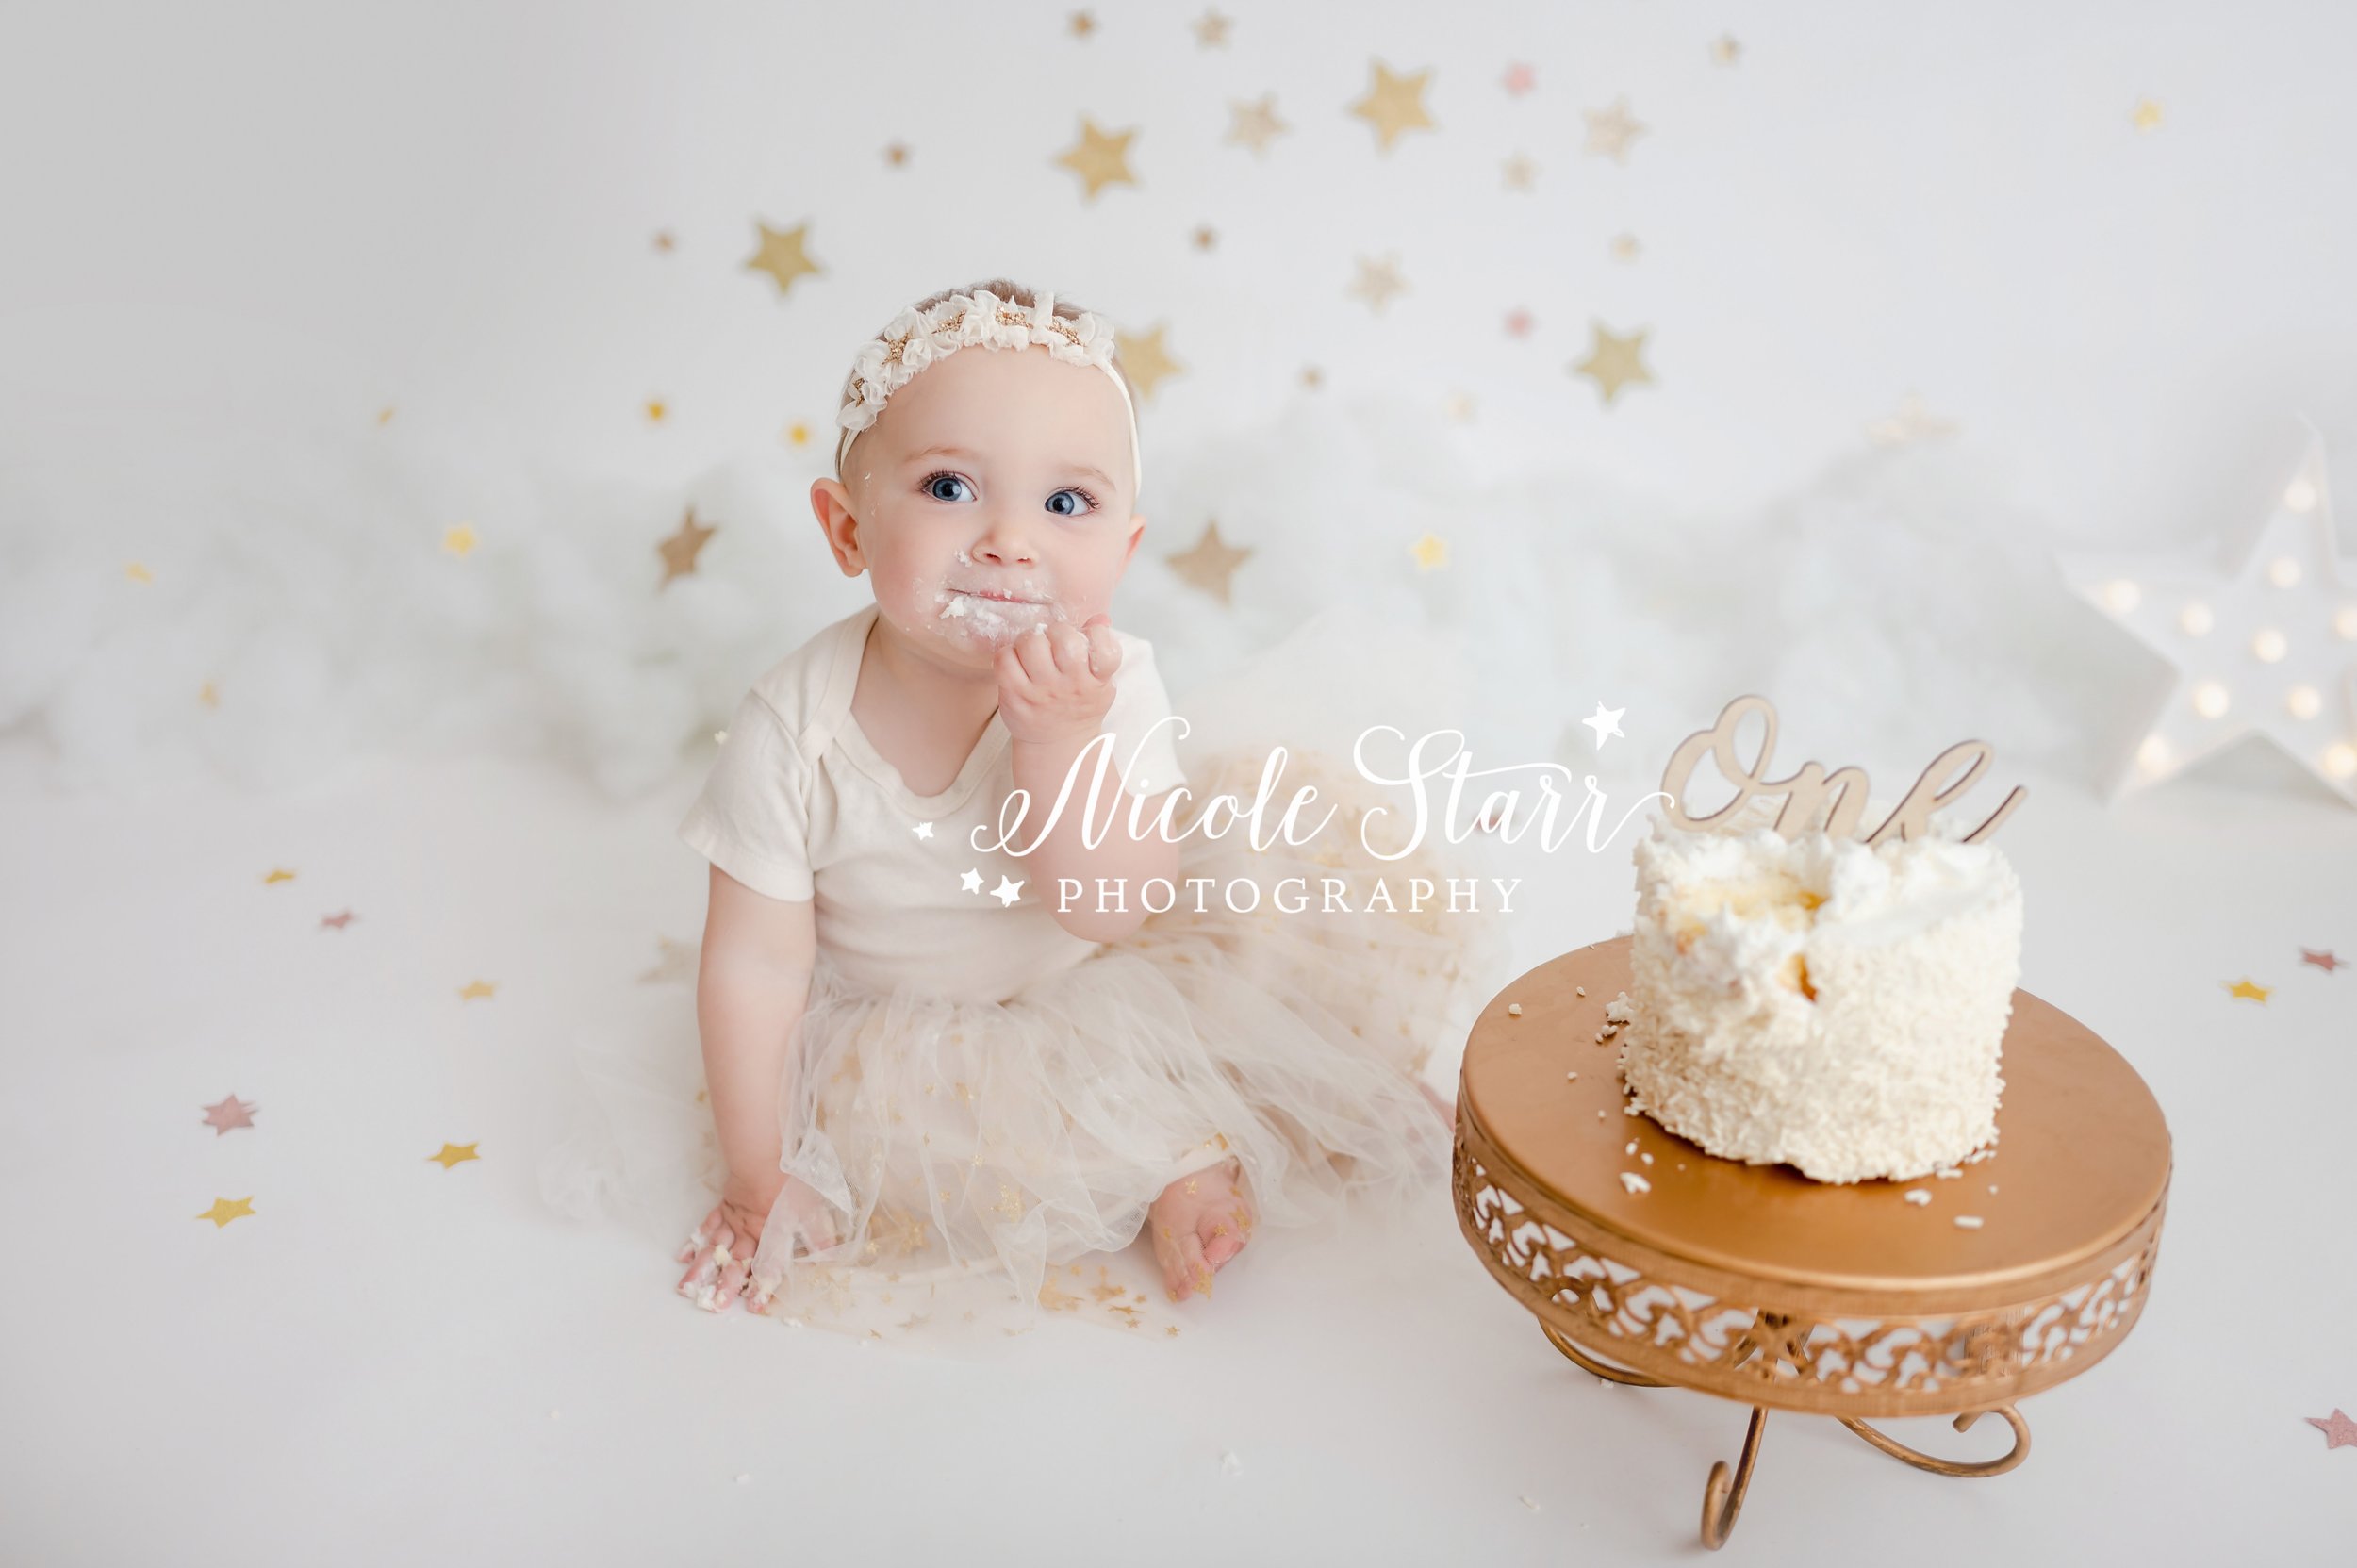 Book An Unforgettable Cake Smash Photography Session